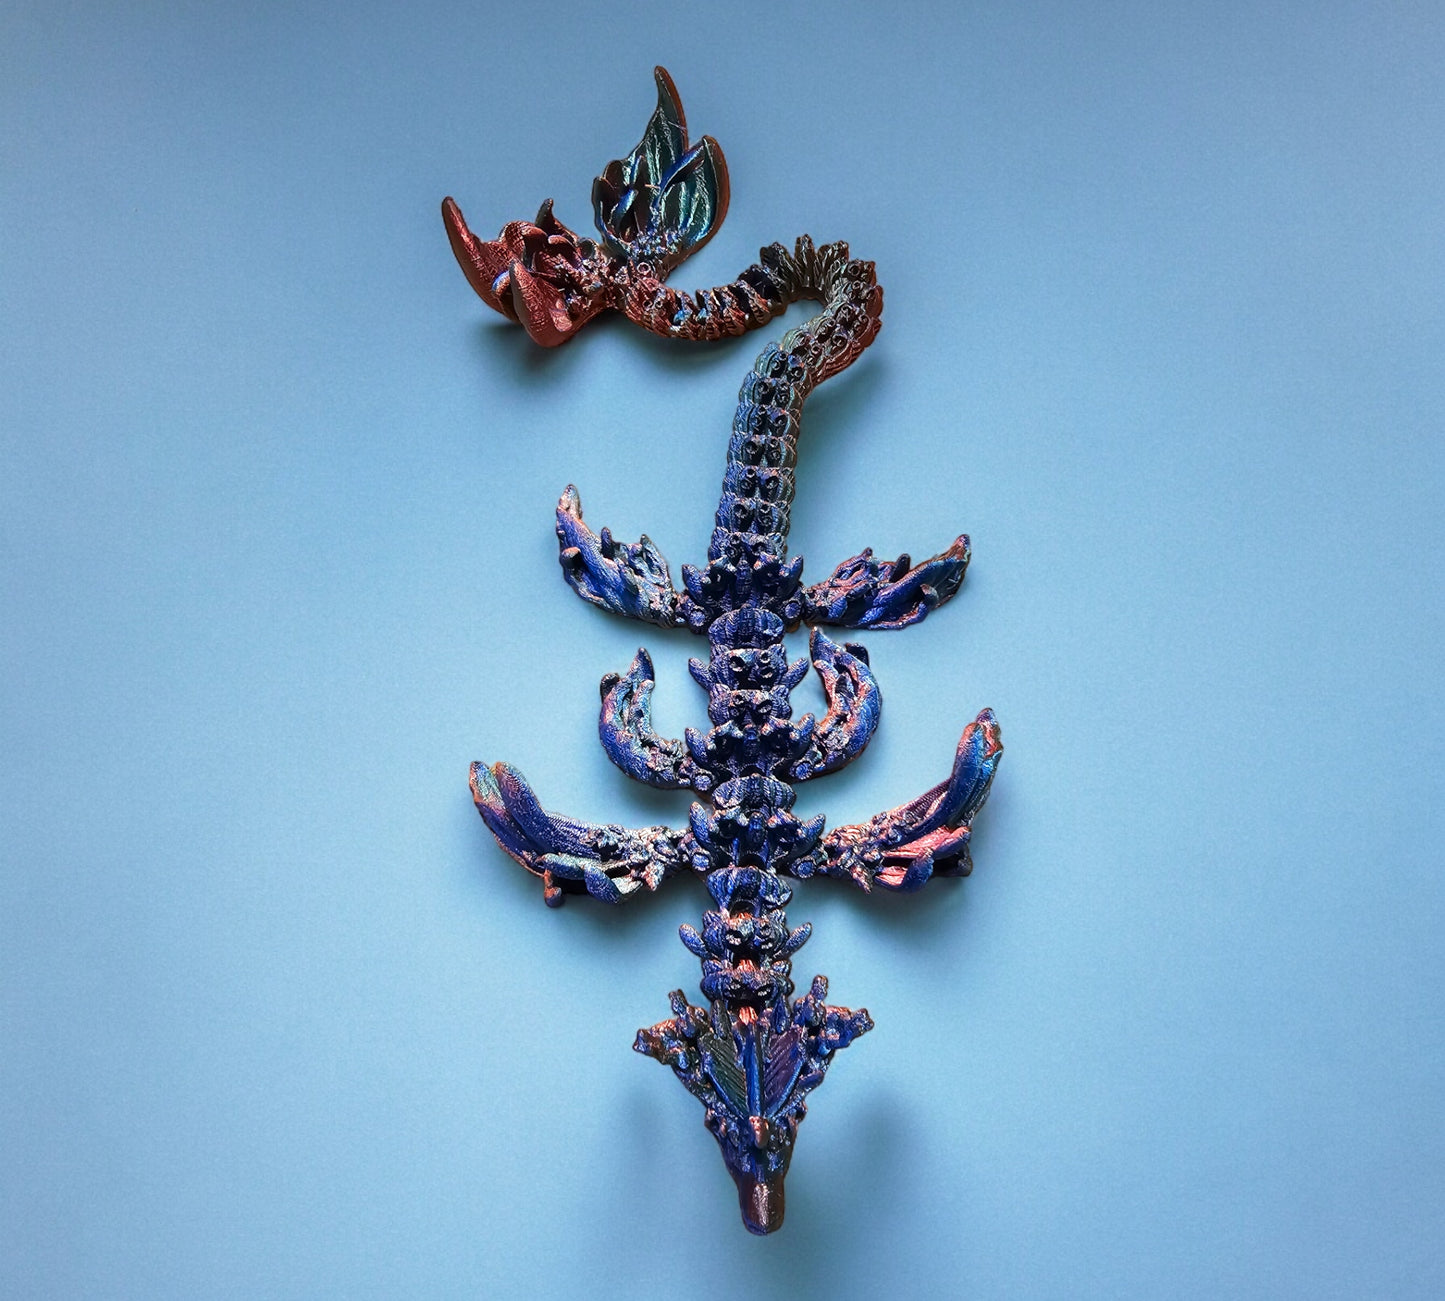 3D Printed Articulated/Sensory Dragons